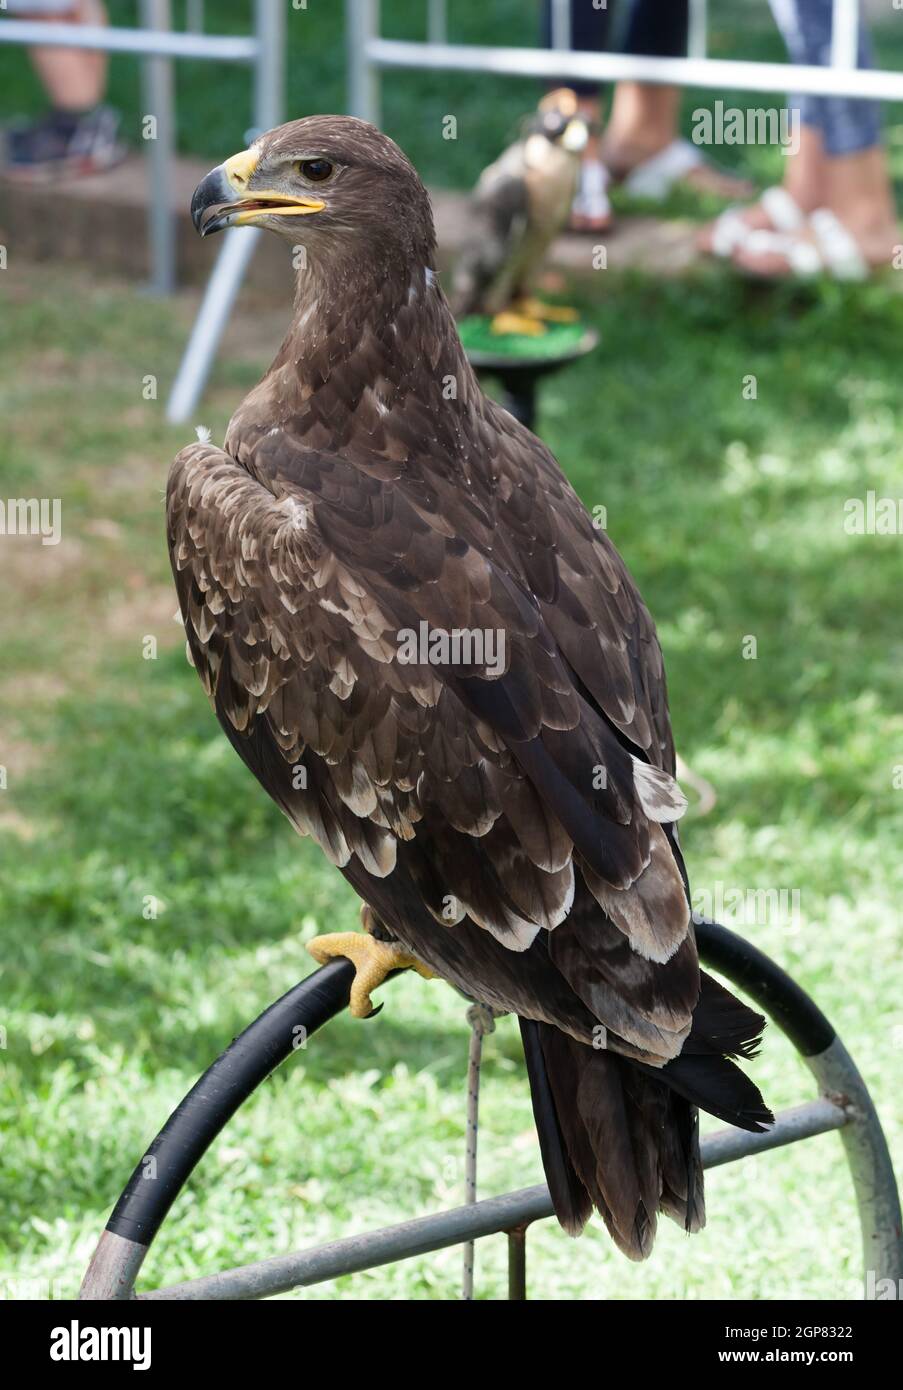 Majestic eagle seen from back during birds of prey show. Stock Photo